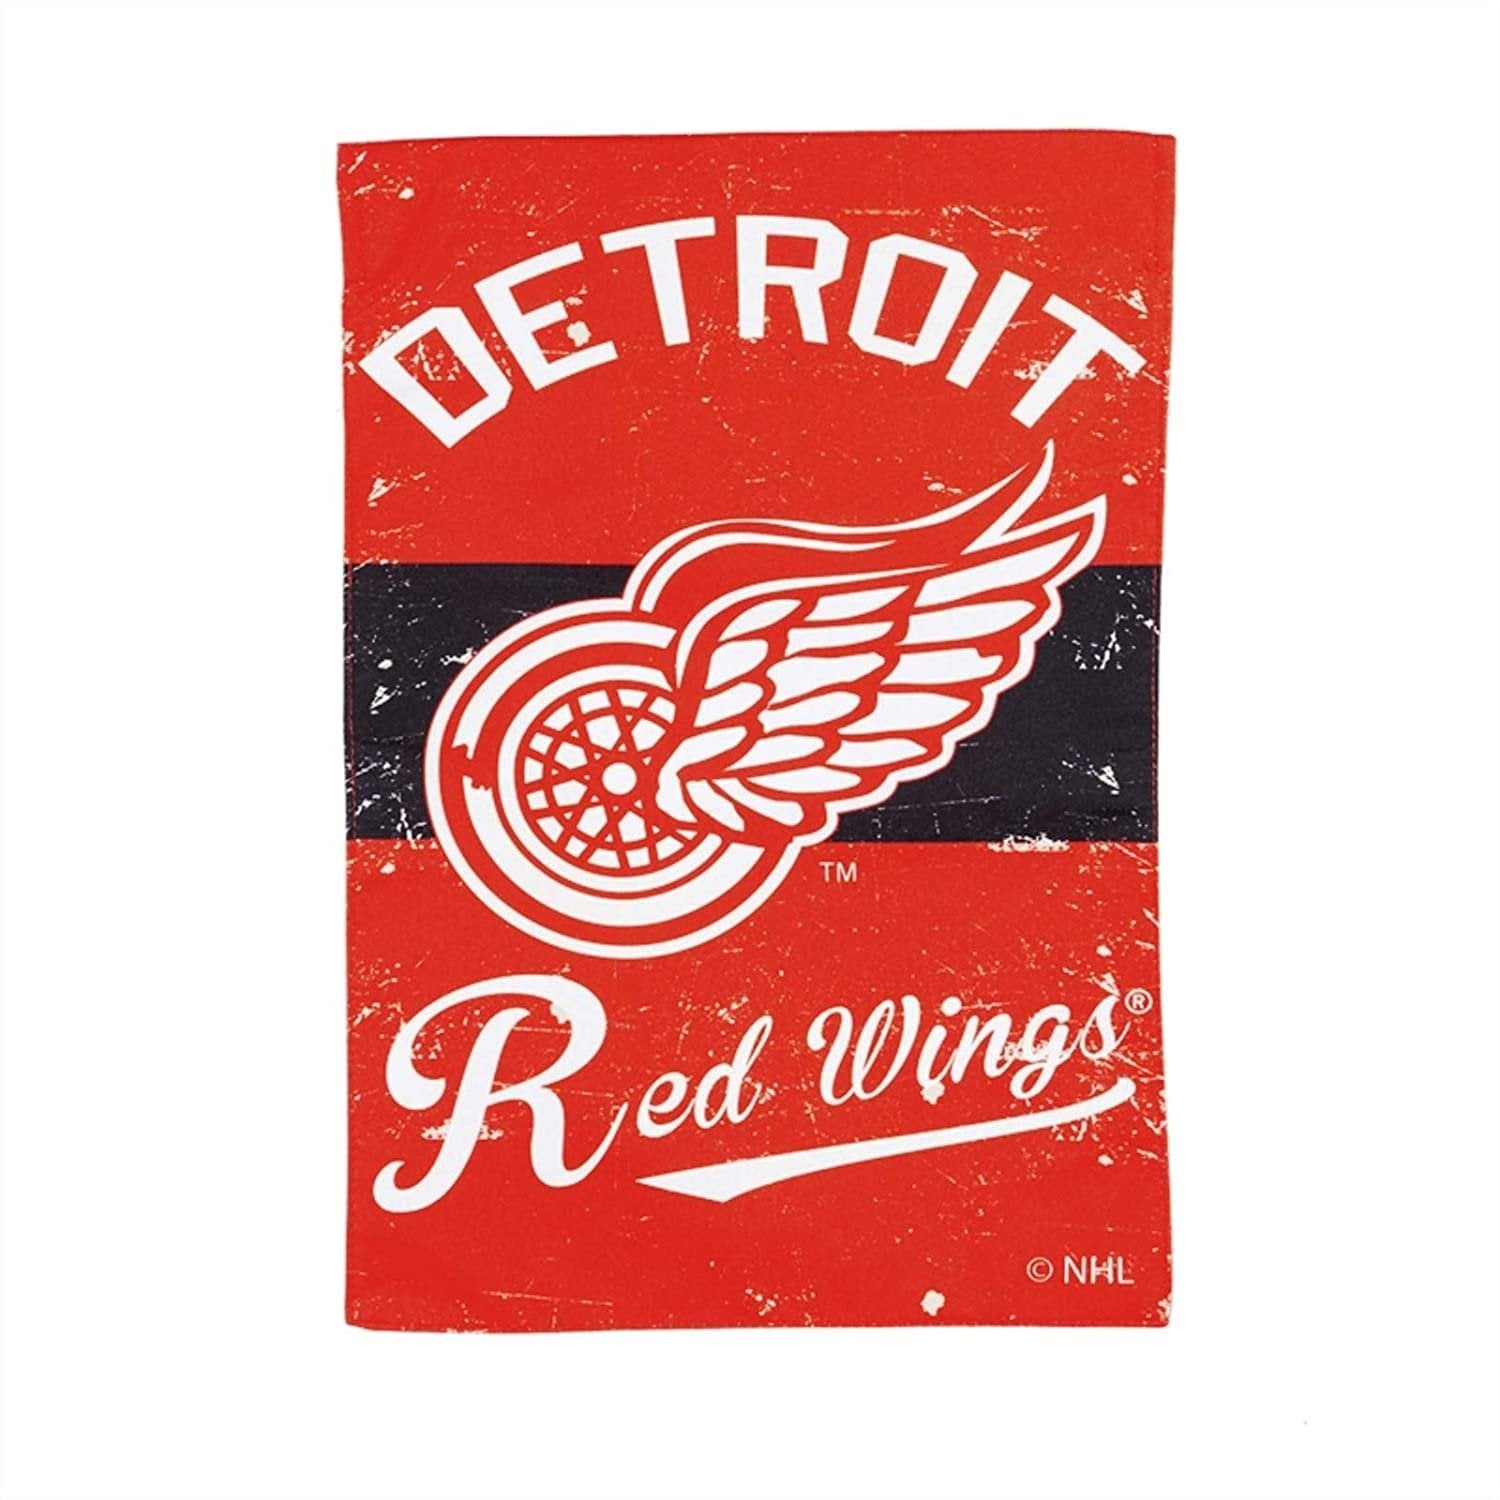 Detroit Red Wings Premium Garden Flag Banner, Double Sided, Vintage Retro Style, Linen, 13x18 Inch